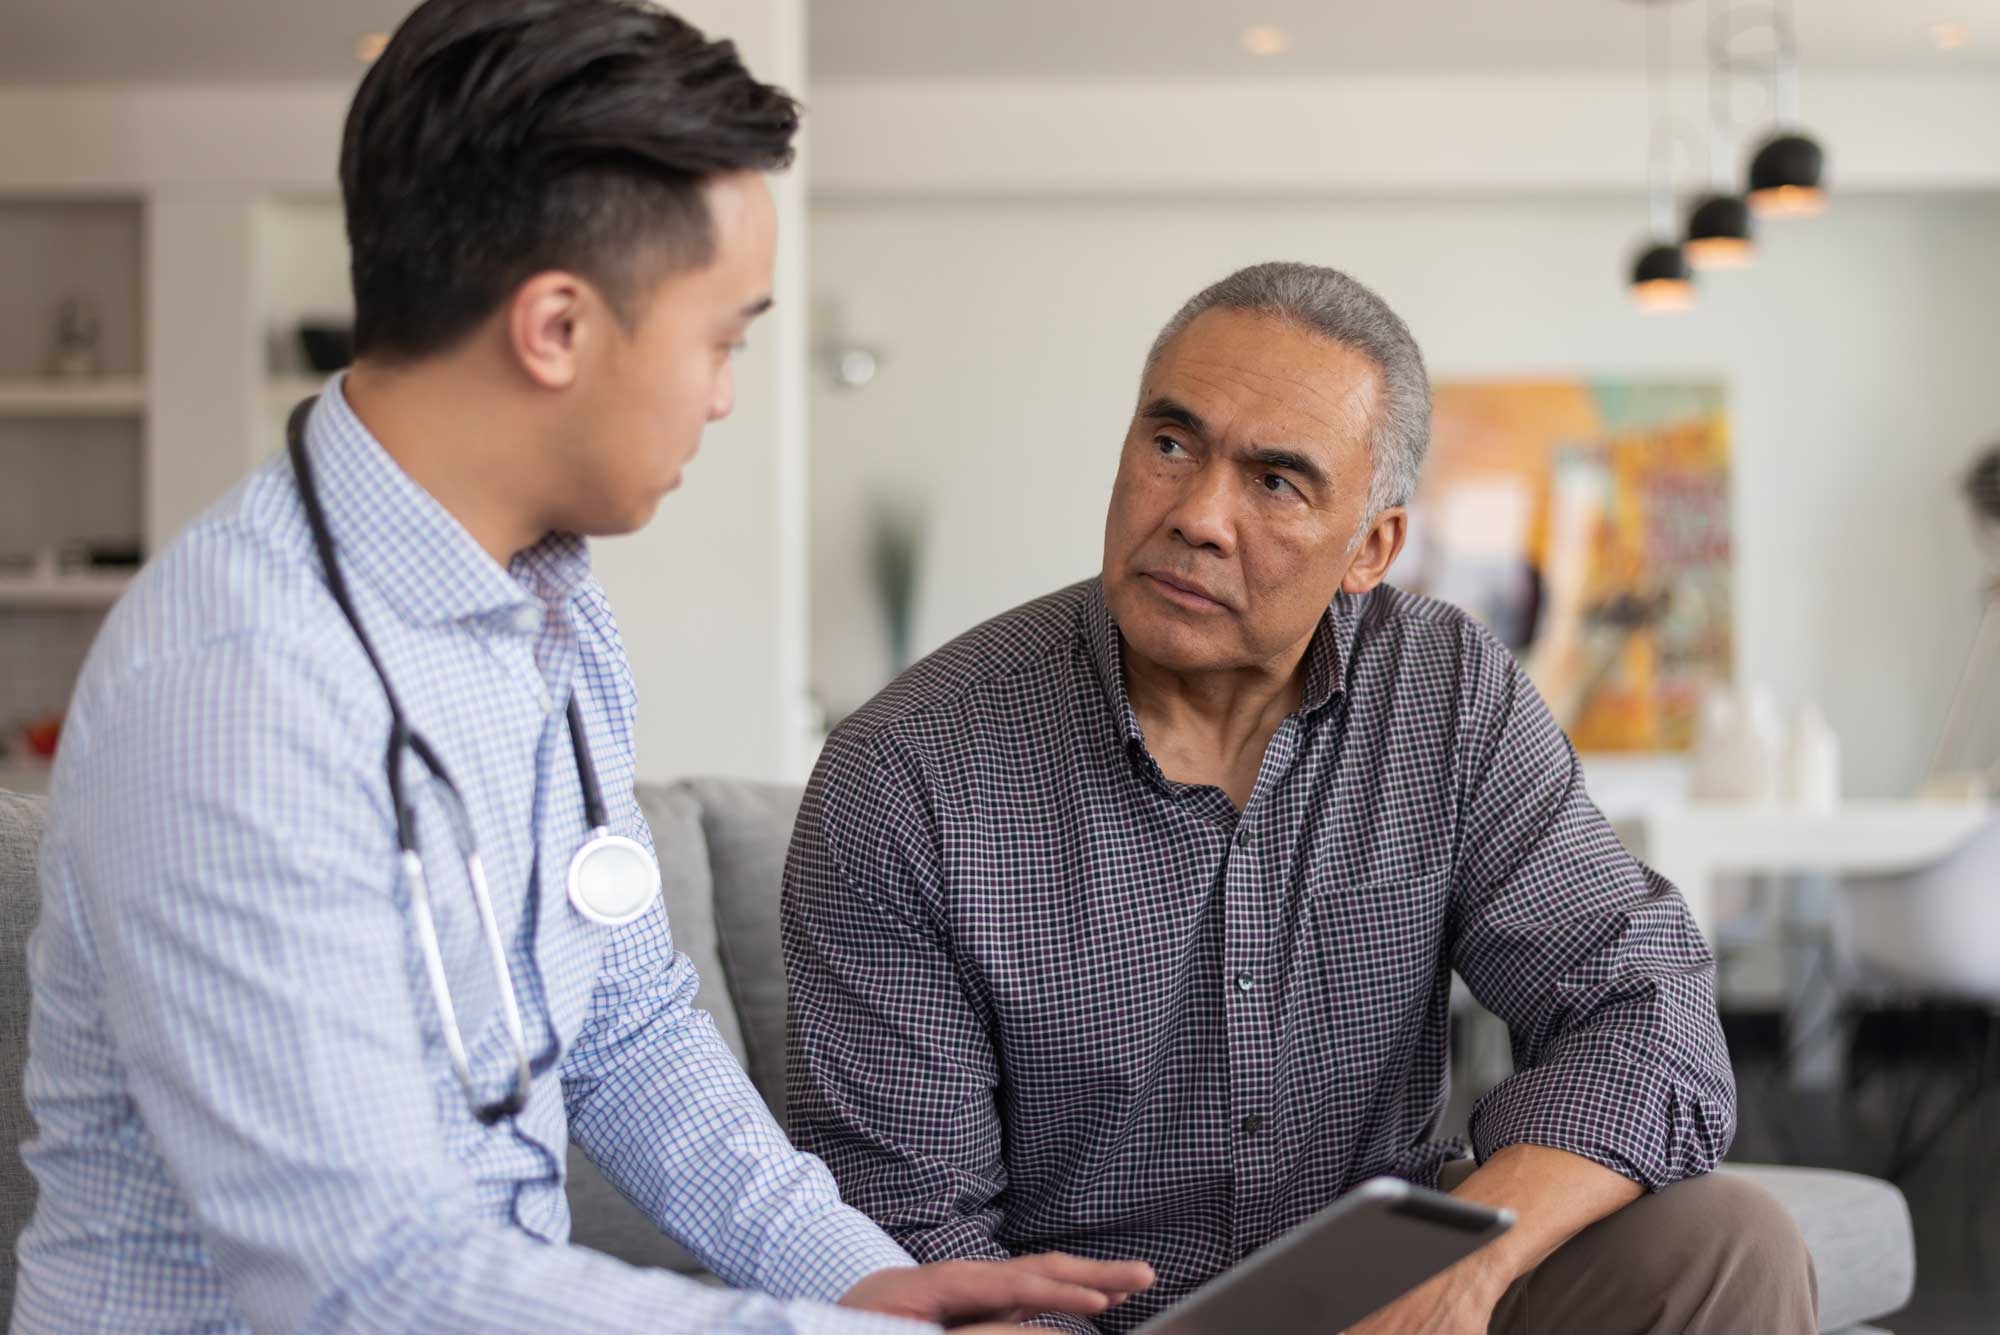 Two men talking in a consultation, one is older patient, other is a healthcare professional